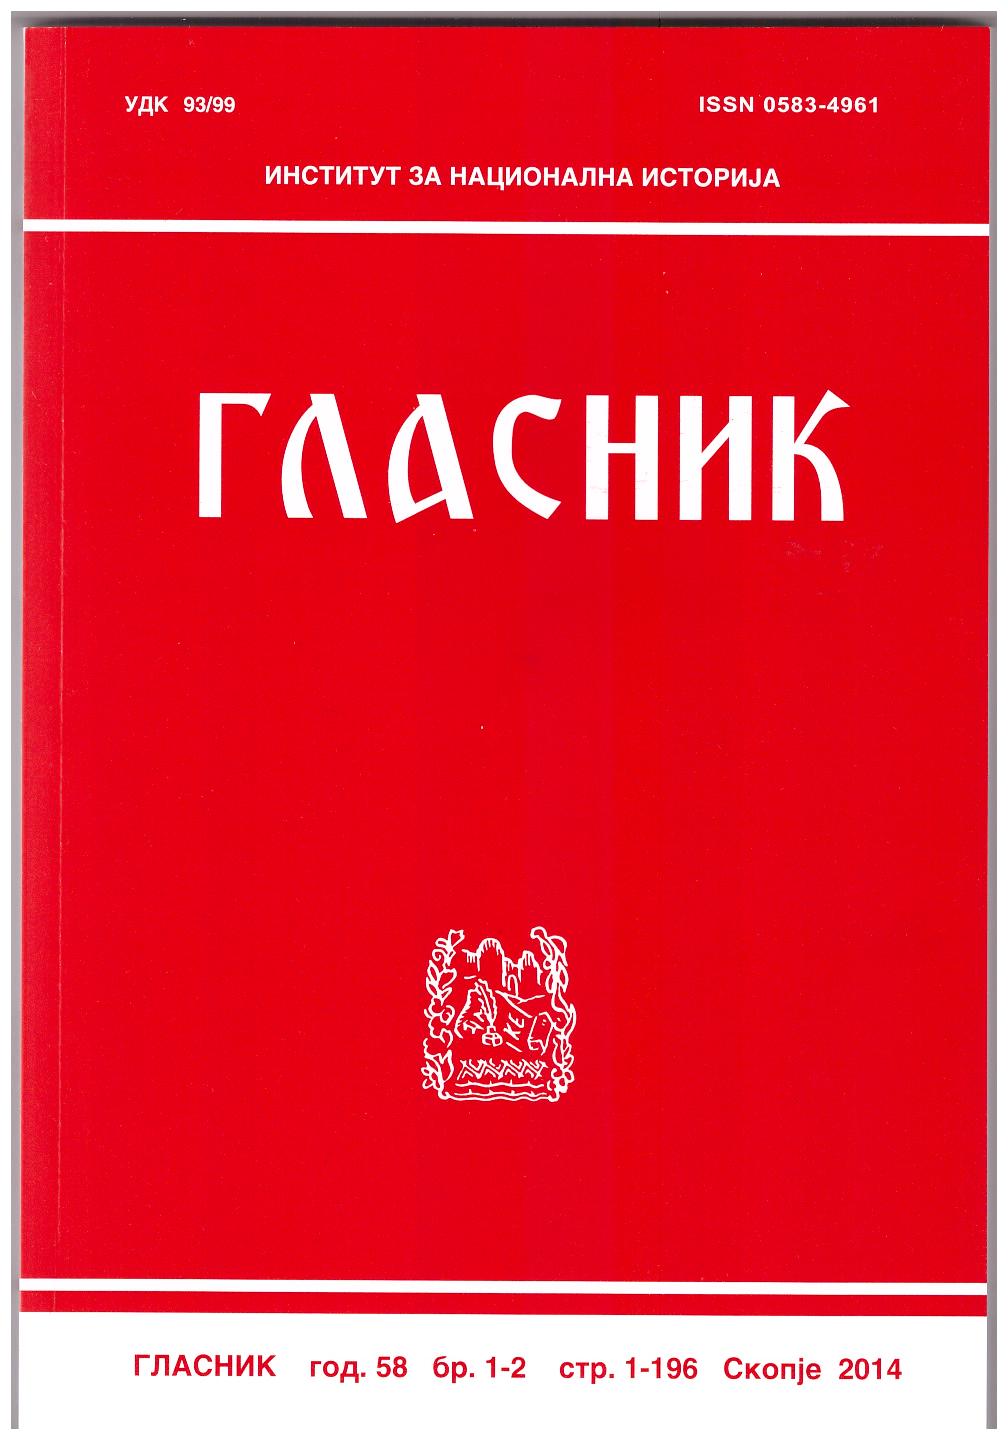 INTERNATIONAL ACTIVITIES OF THE MOVEMENT FOR LIBERATION AND UNIFICATION OF MACEDONIA (1973 - 1977) Cover Image